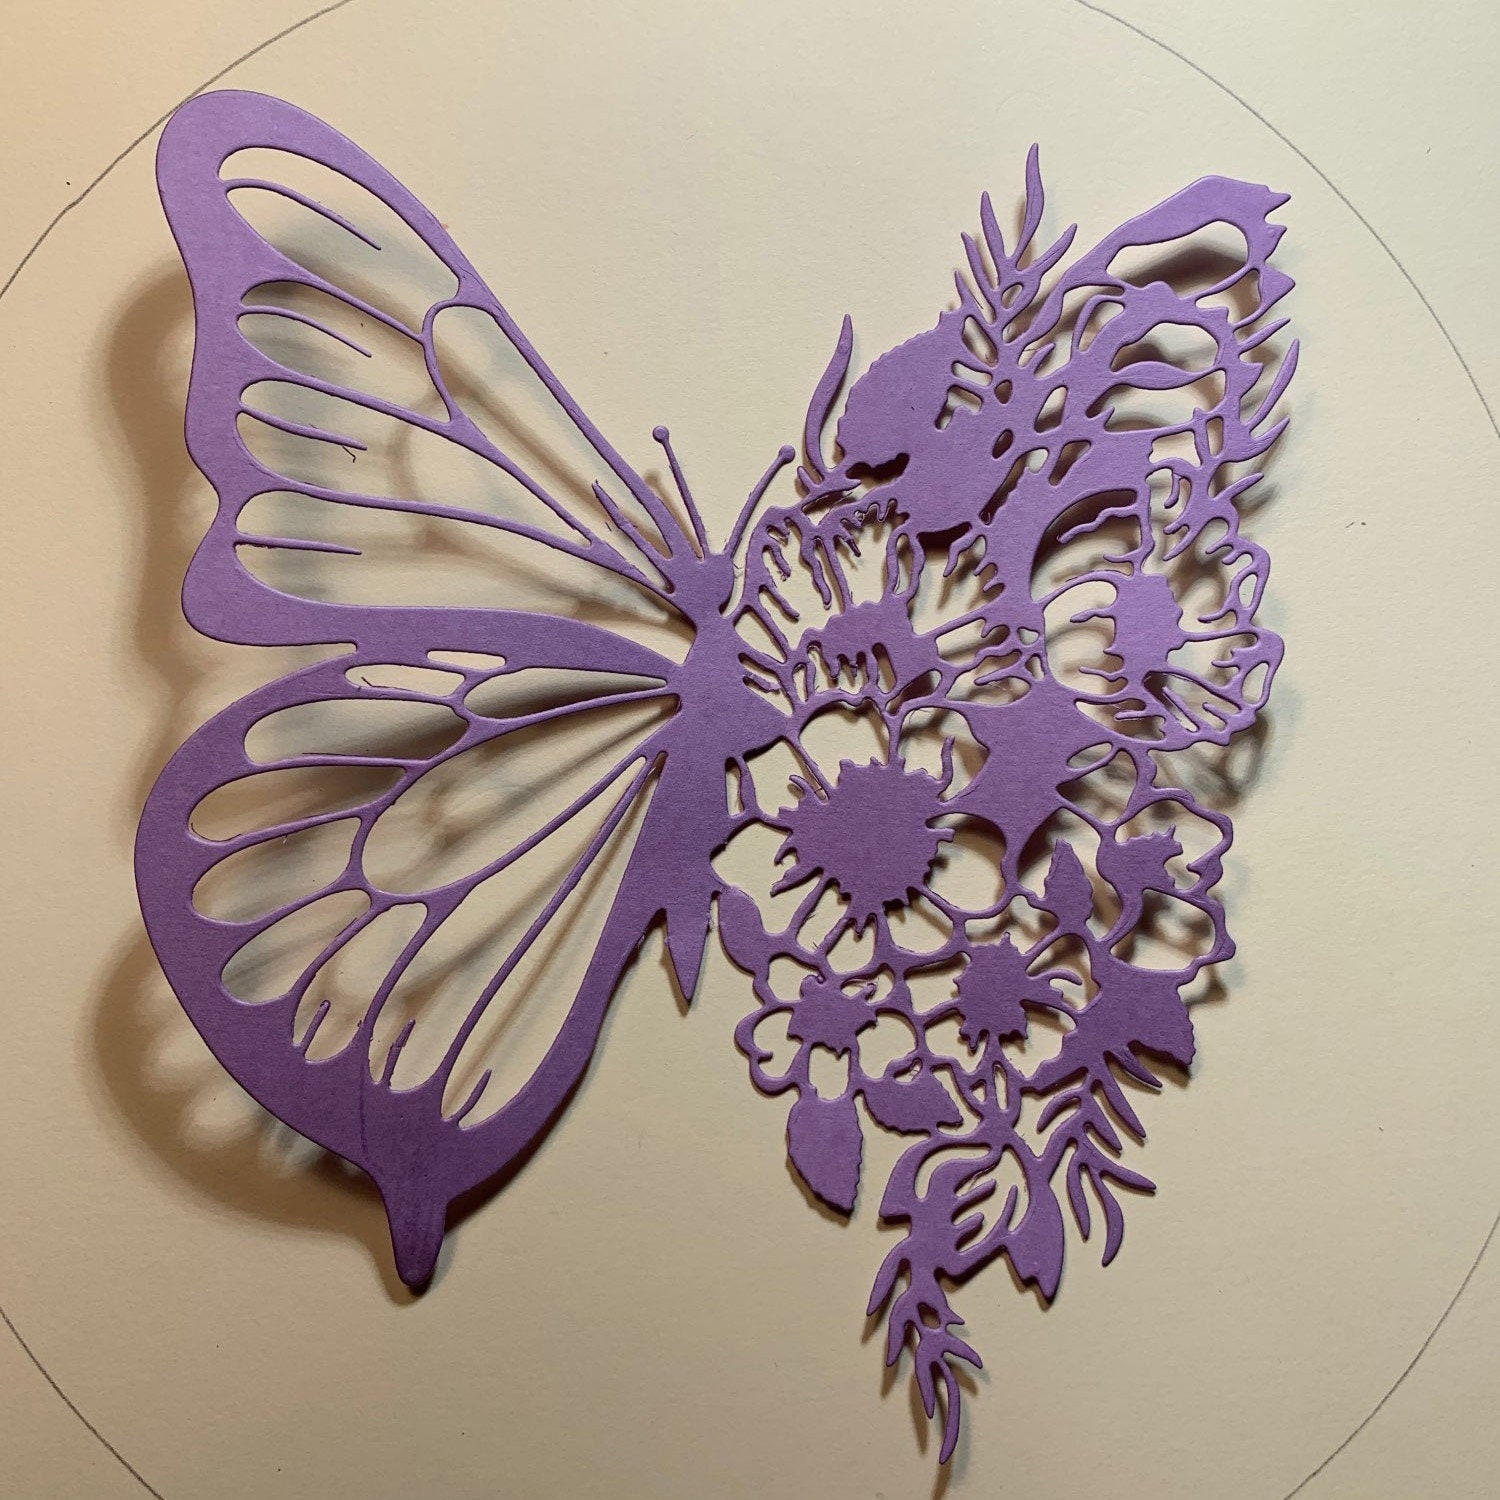  Metal Die Cuts Butterfly Greeting Card,Cutting Dies for Card  Making,Embossing Dies for Scrapbooking DIY Album Paper Cards Art Craft  Decoration for Mother's Day Valentine's Day,5.16x4.18 inch